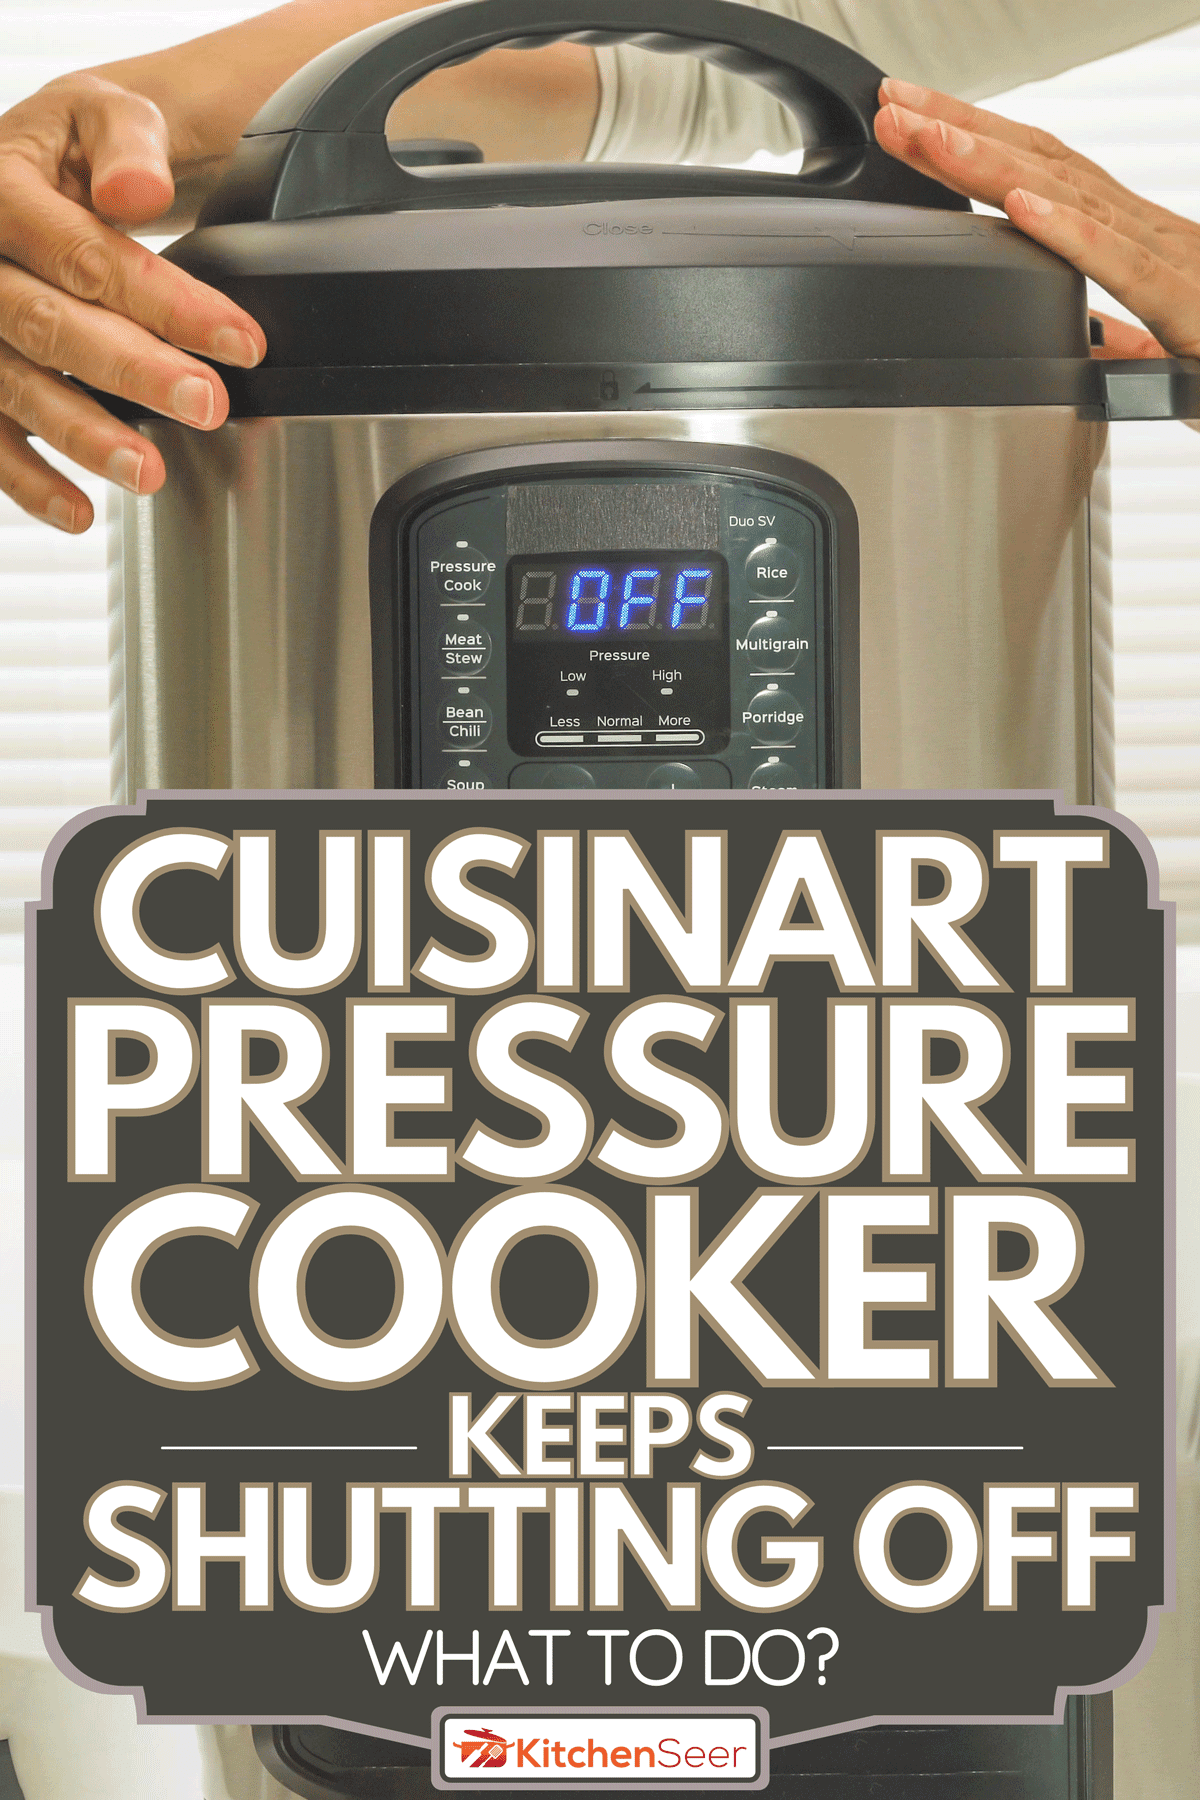 Woman holding the pressure cooker on kitchen table, Cuisinart Pressure Cooker Keeps Shutting Off - What To Do?